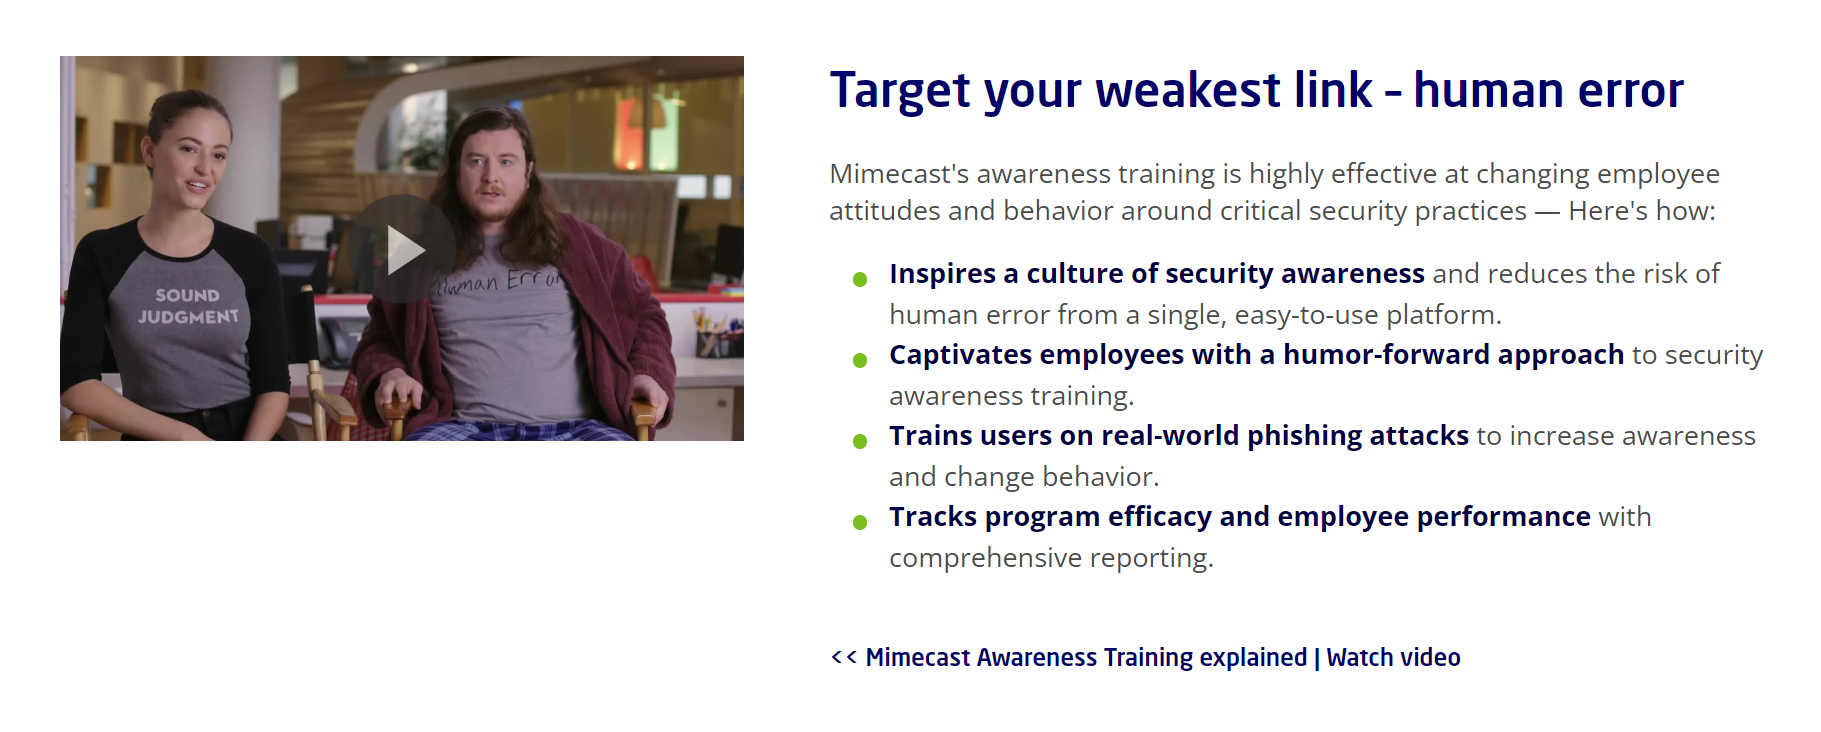 The cybersecurity awareness ad also includes a video explaining how people are often the weakest link for companies